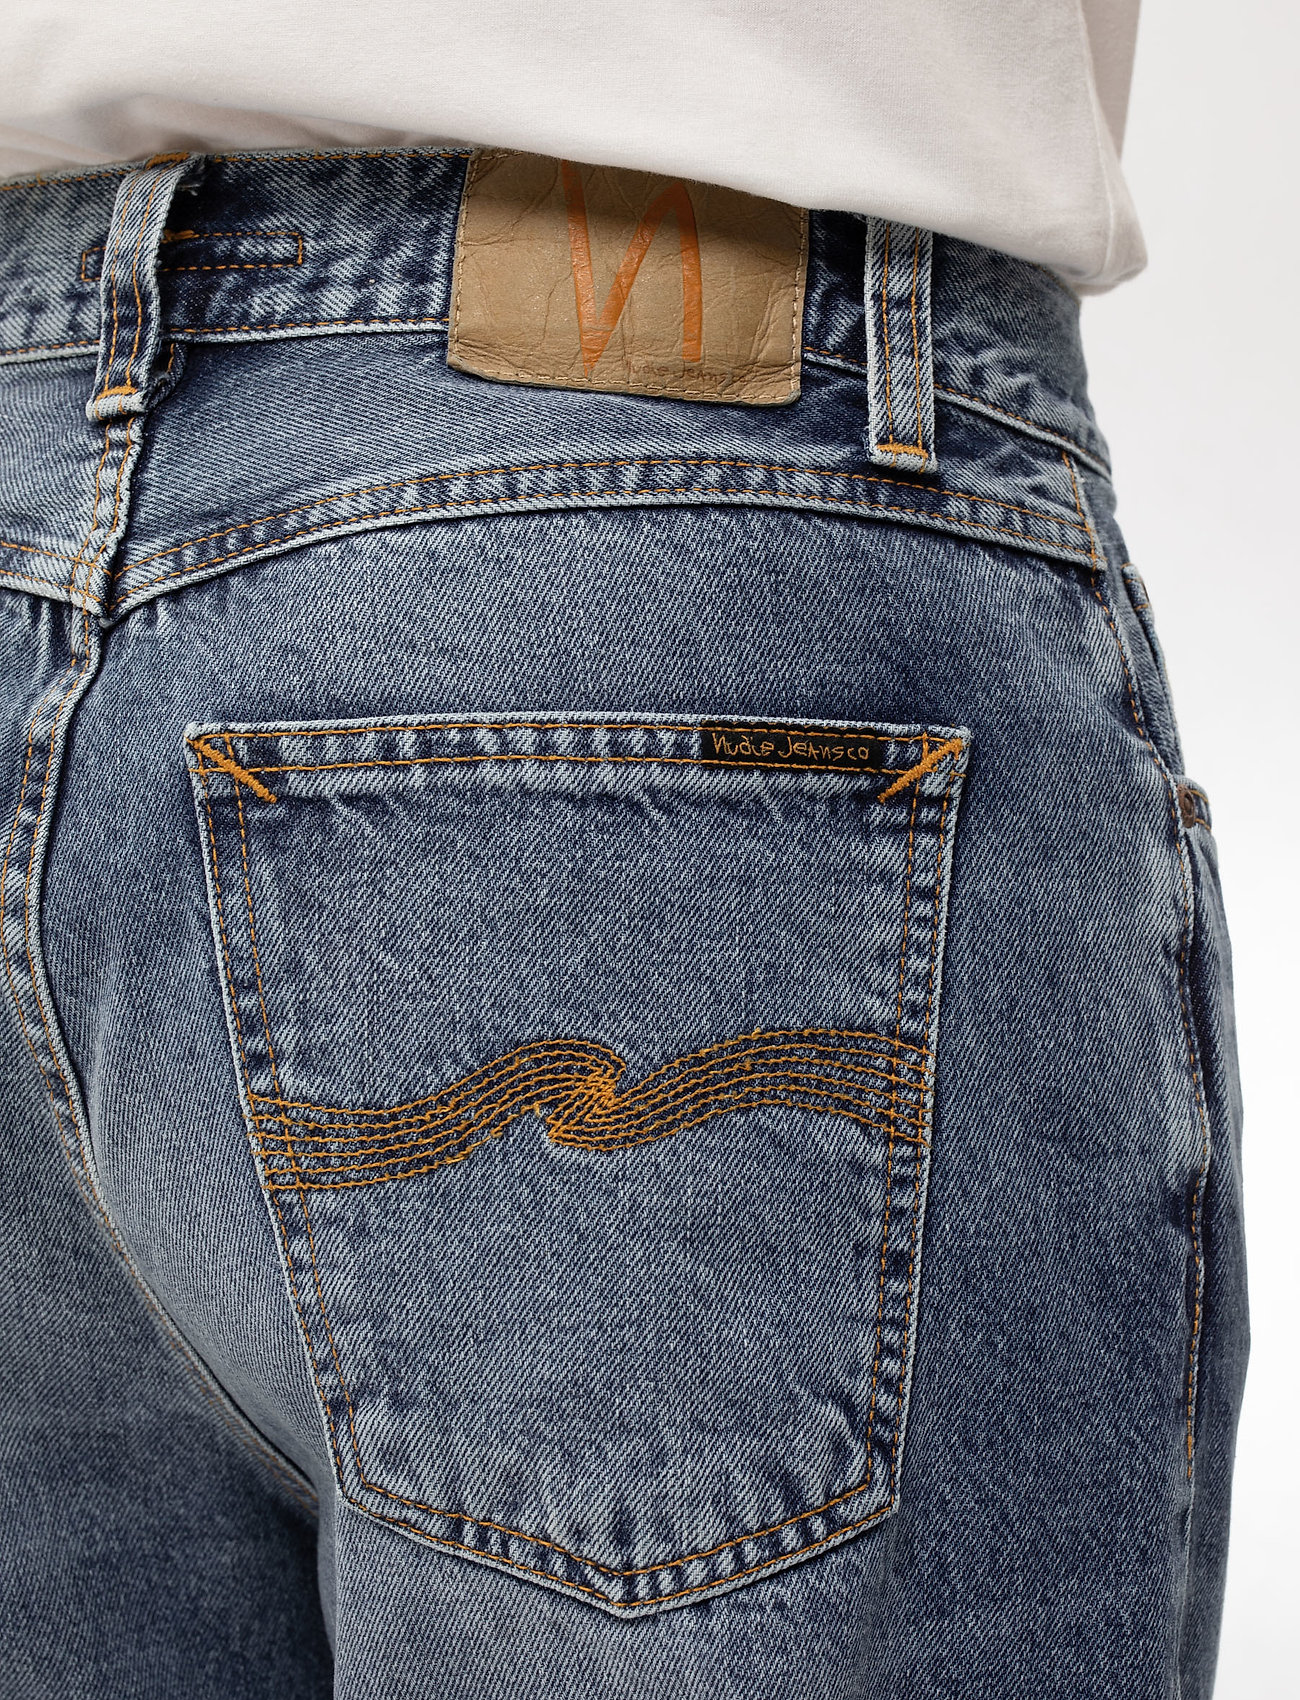 Nudie Jeans - Tuff Tony - relaxed jeans - indigo travel - 4